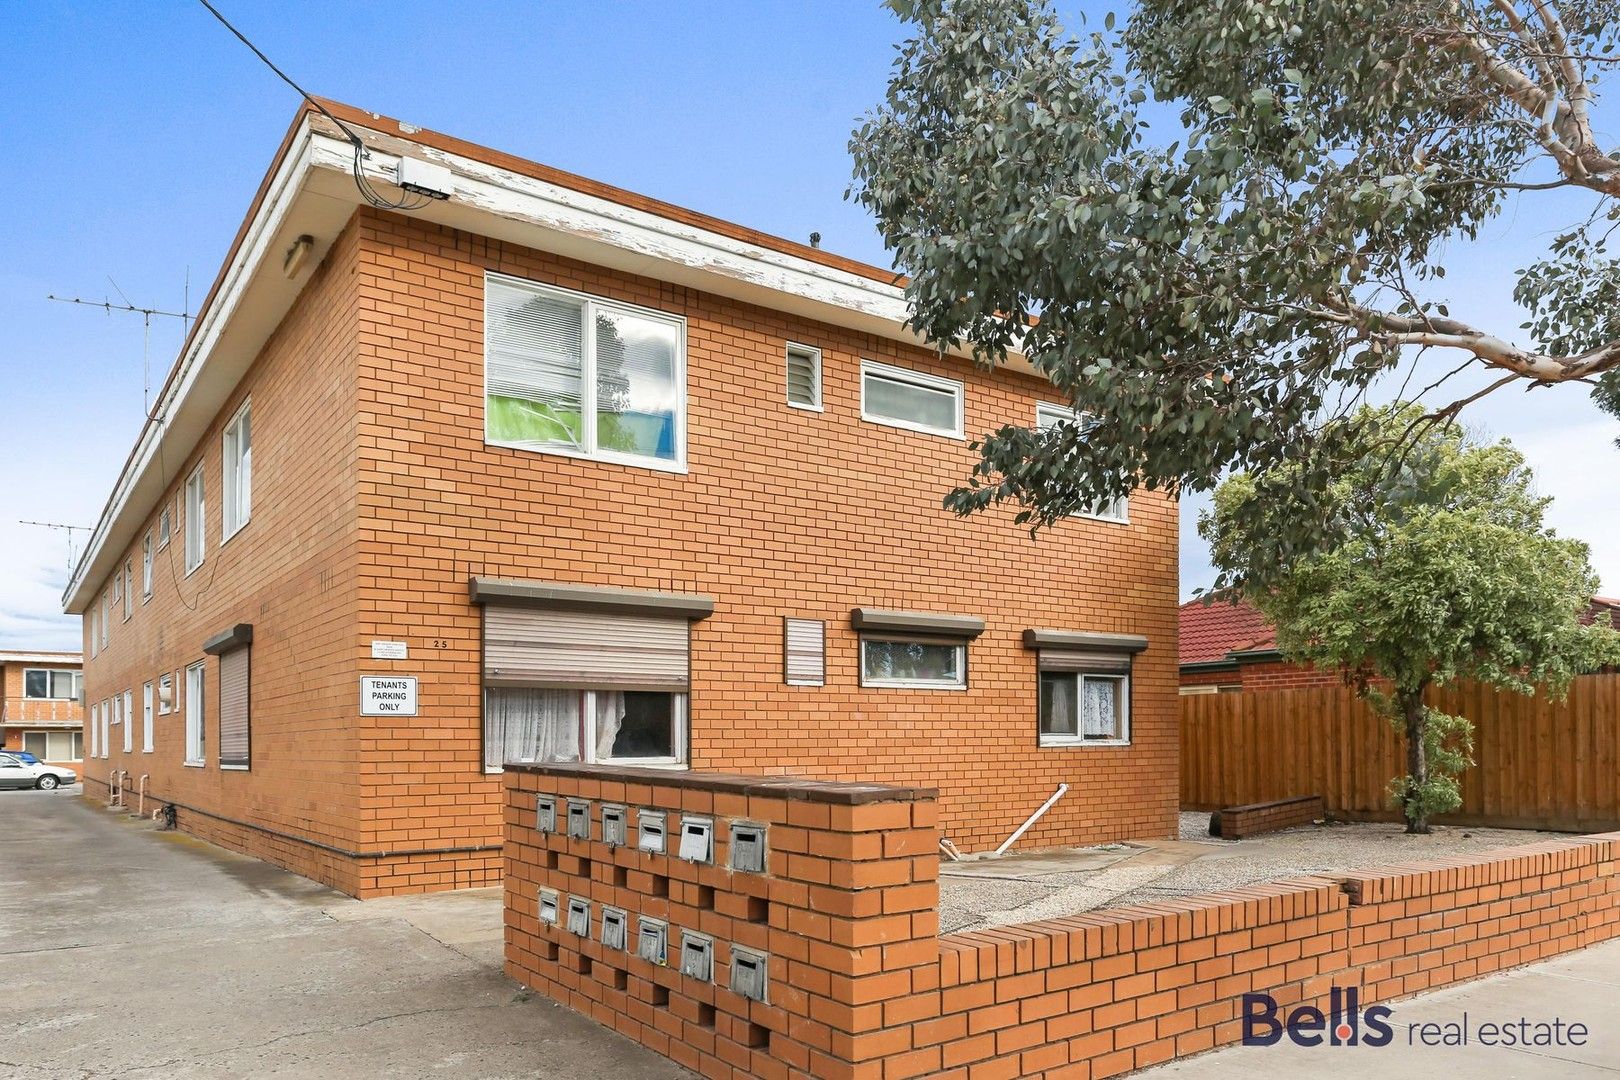 2 bedrooms Apartment / Unit / Flat in 3/25 Ridley Street ALBION VIC, 3020